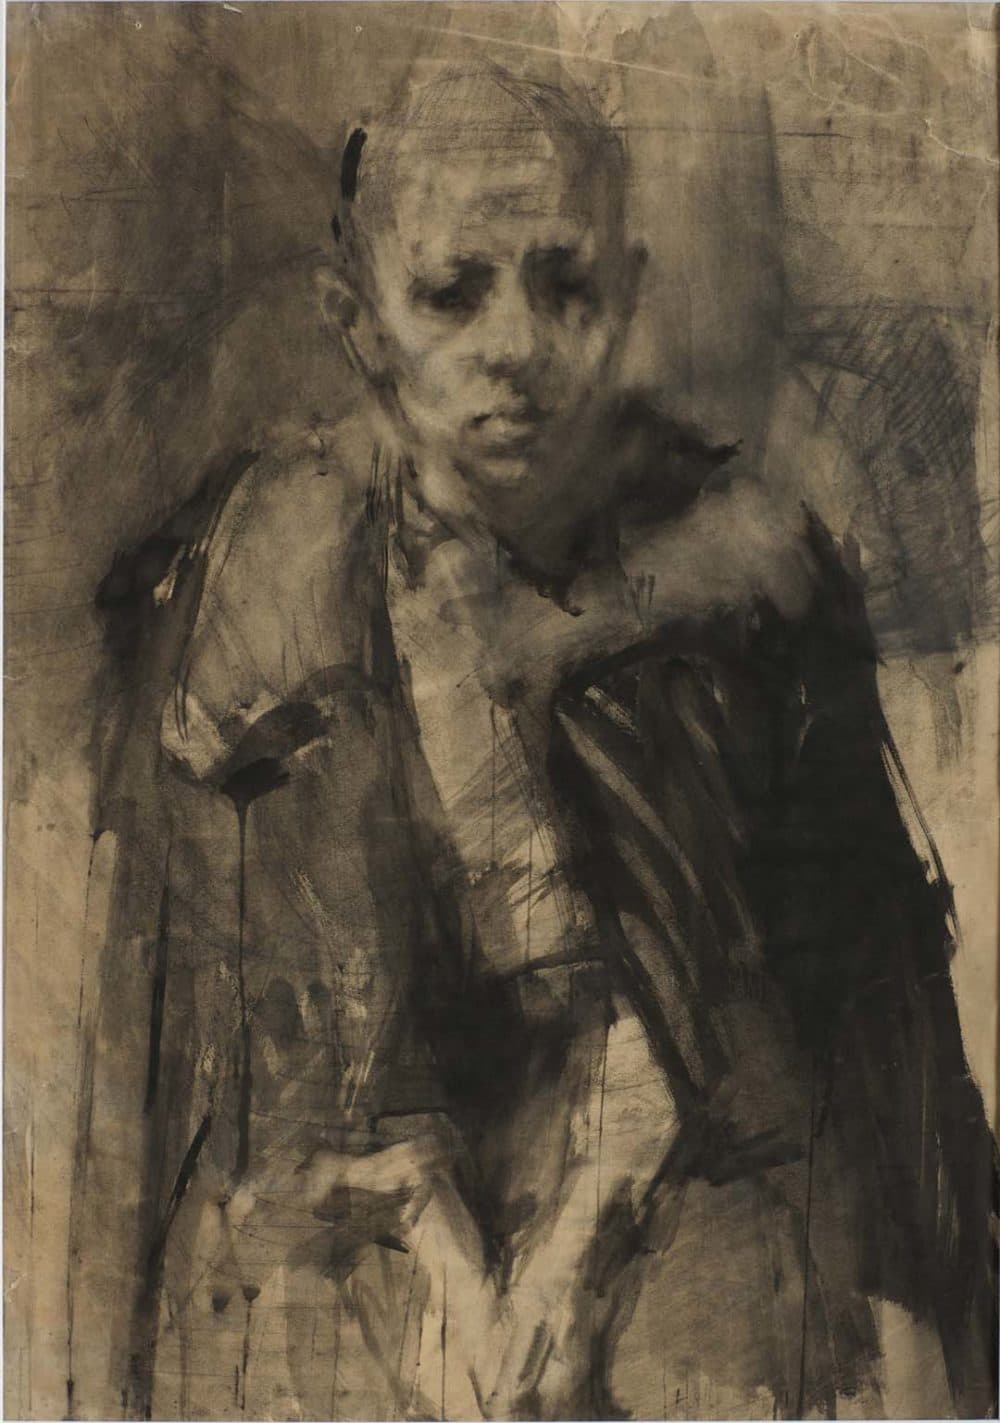 Felix Lembersky. &quot;Portrait of a Boy,&quot; circa 1942–46. Charcoal, watercolor, and ink on paper, 30 x 21 inches. (Courtesy Yelena Lembersky)